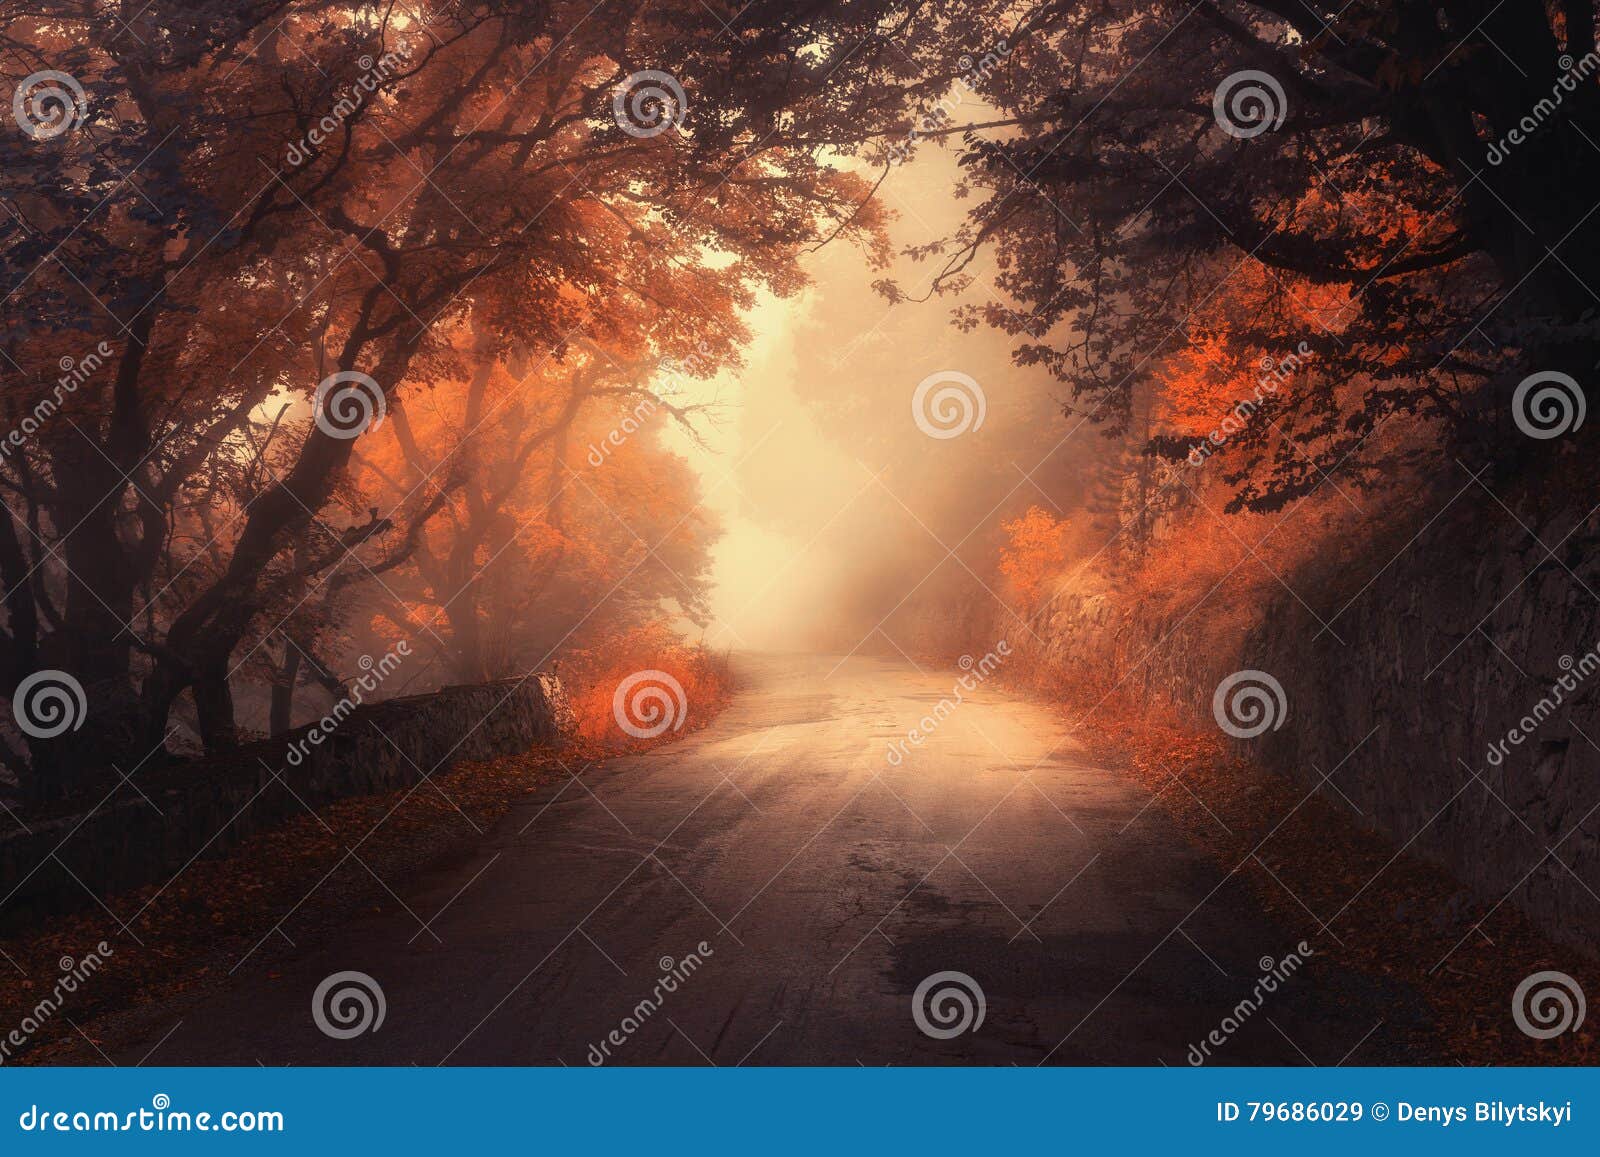 mystical autumn red forest with road in fog